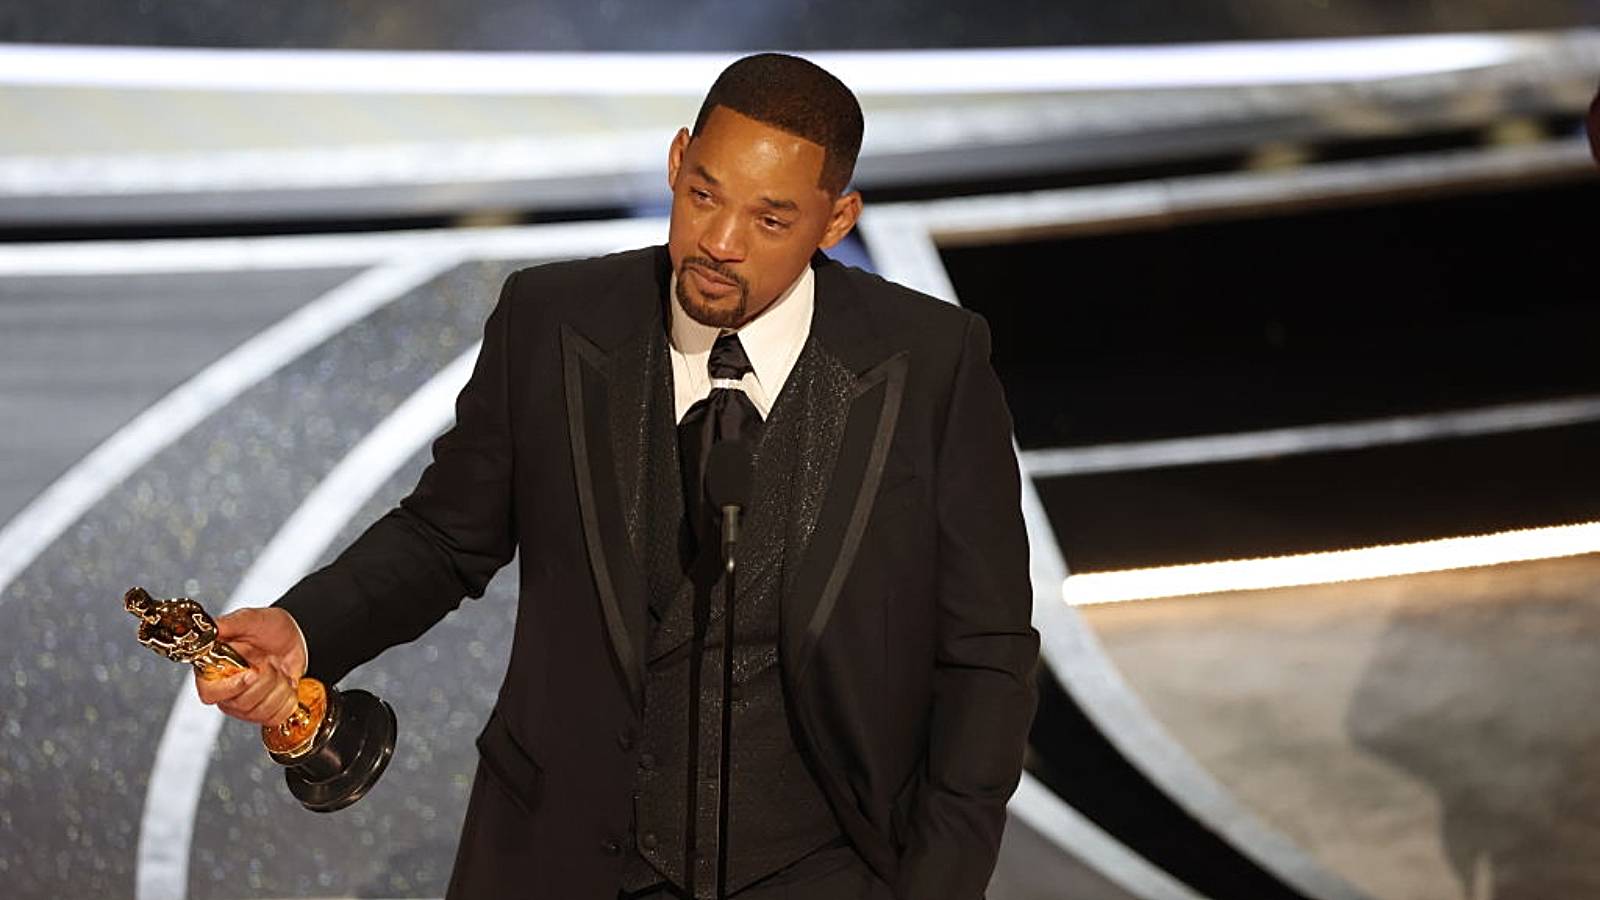 Will Smith accepts the award for Best Actor in a Leading Role for "King Richard" during the show at the 94th Academy Awards at the Dolby Theatre at Ovation Hollywood on Sunday, March 27, 2022. 